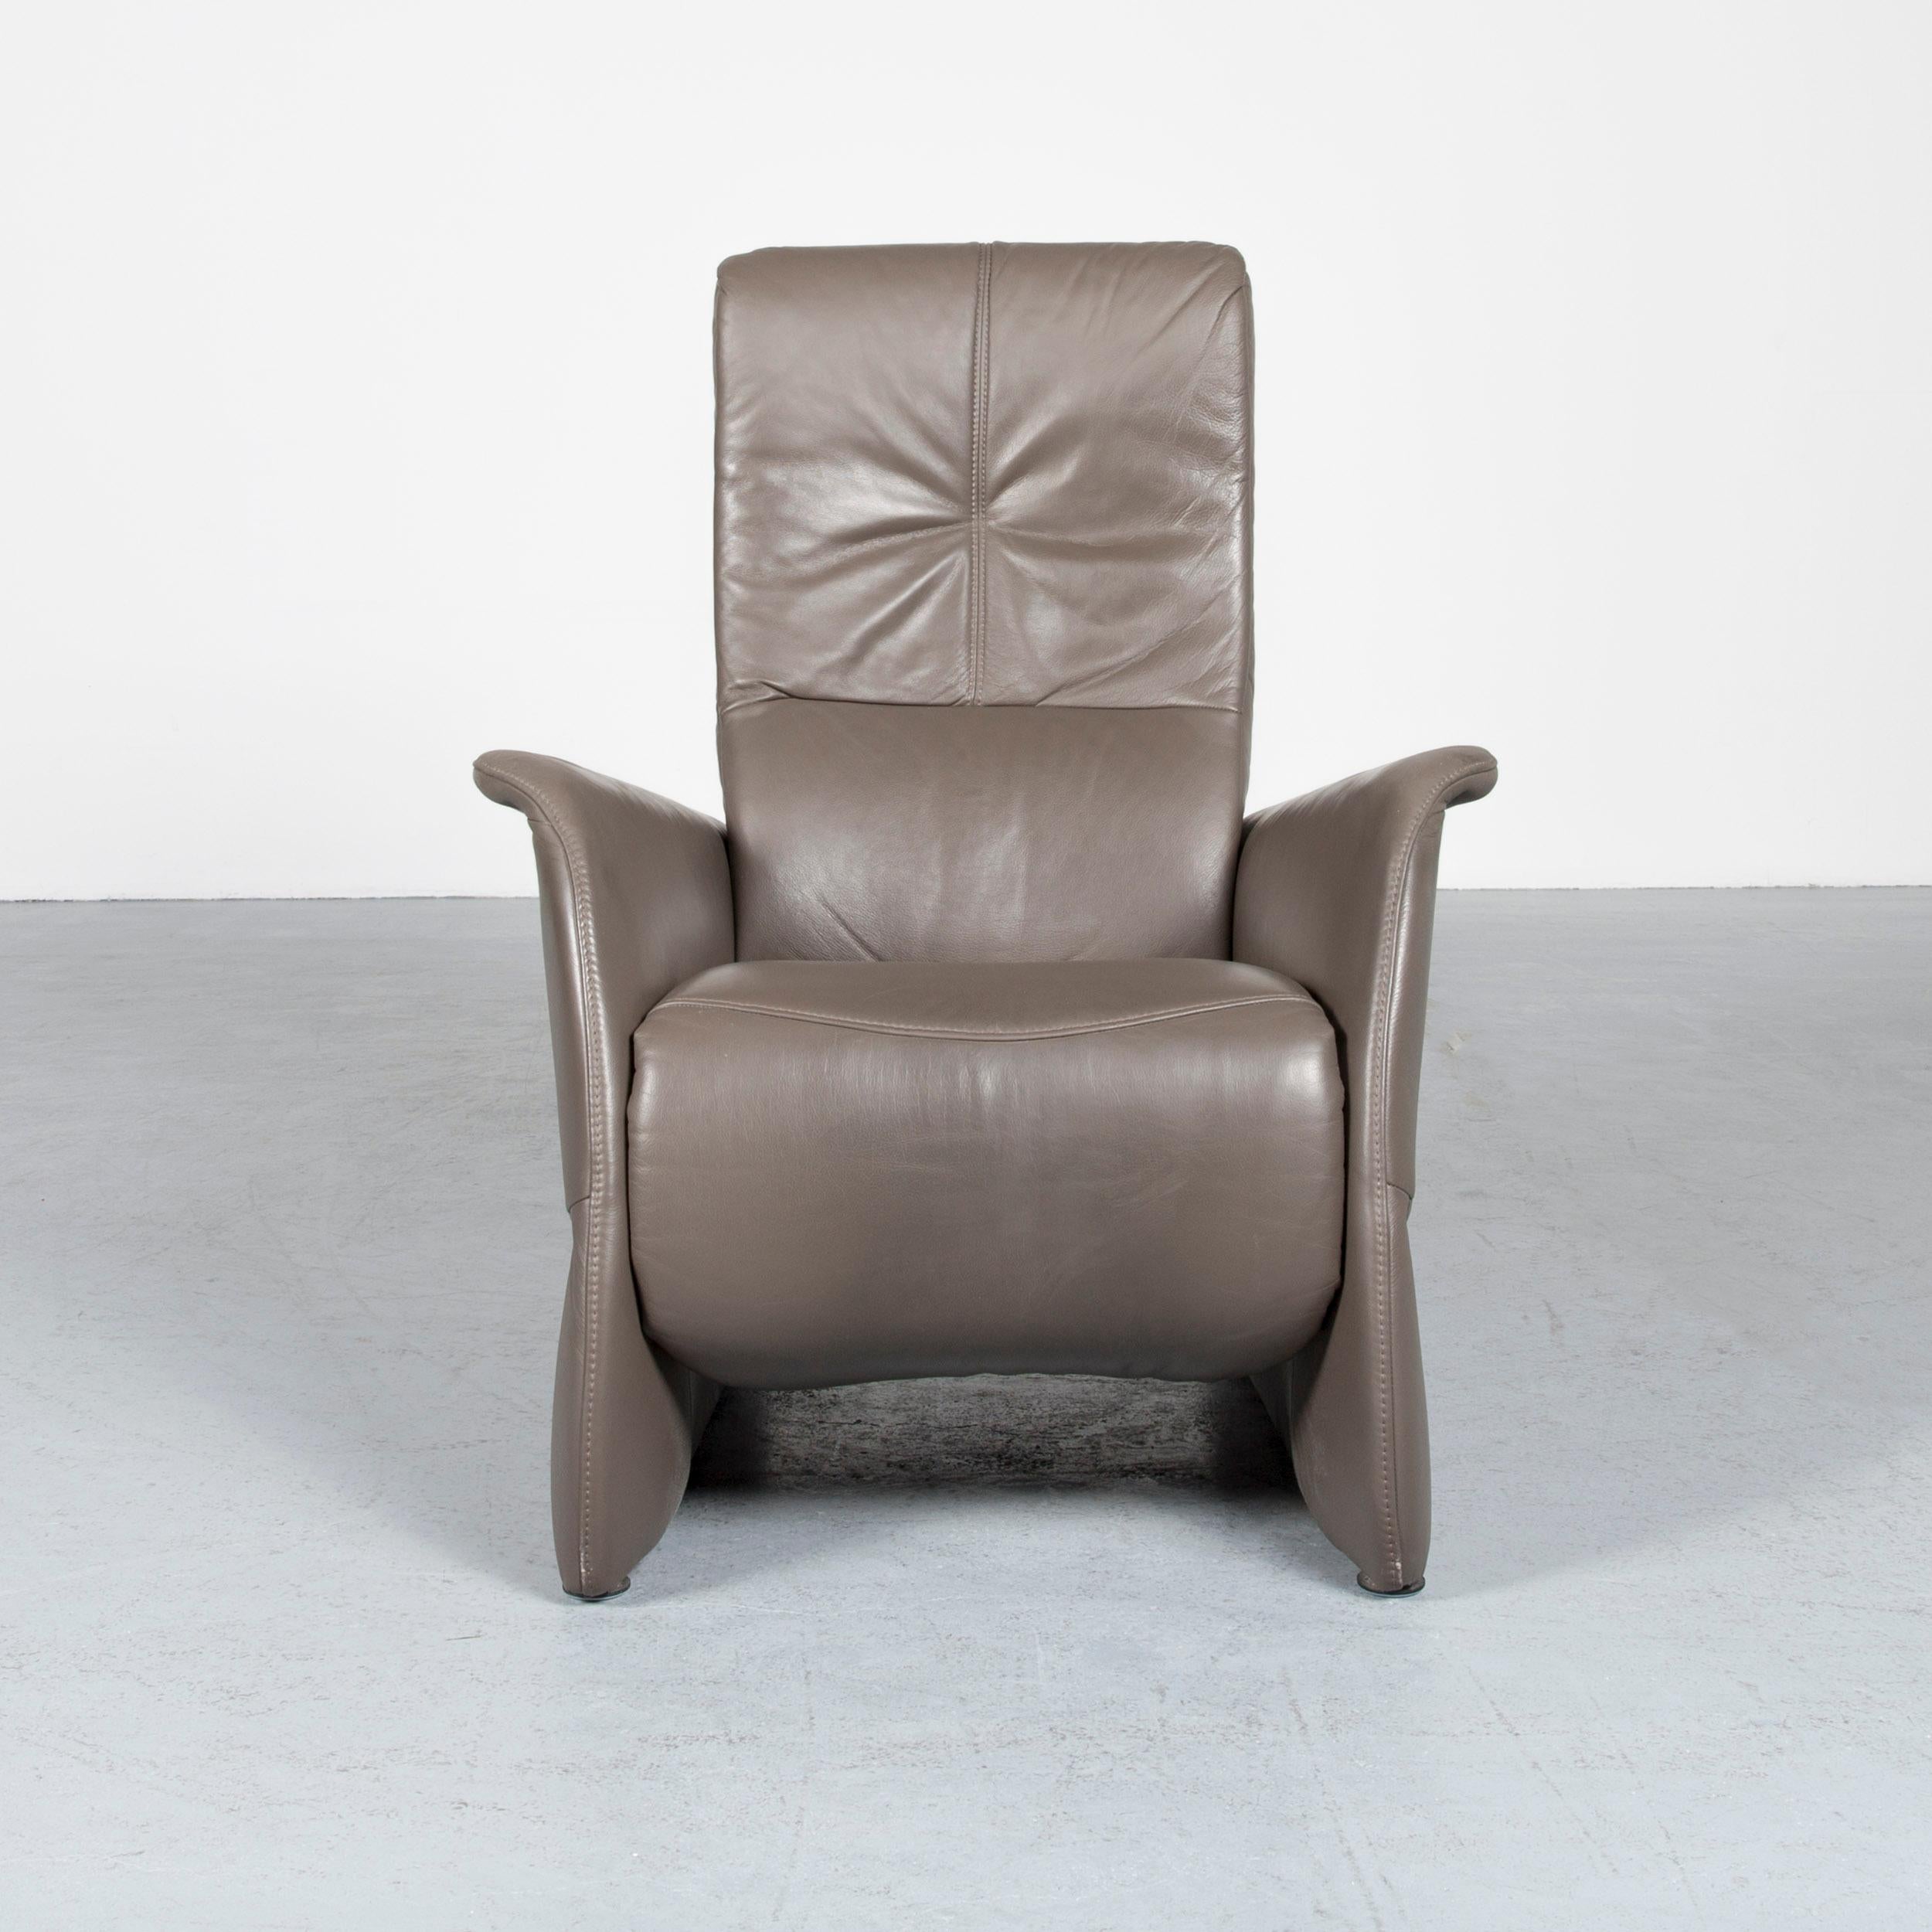 Modern Himolla Designer Leather Armchair Grey Relax Function Chair For Sale